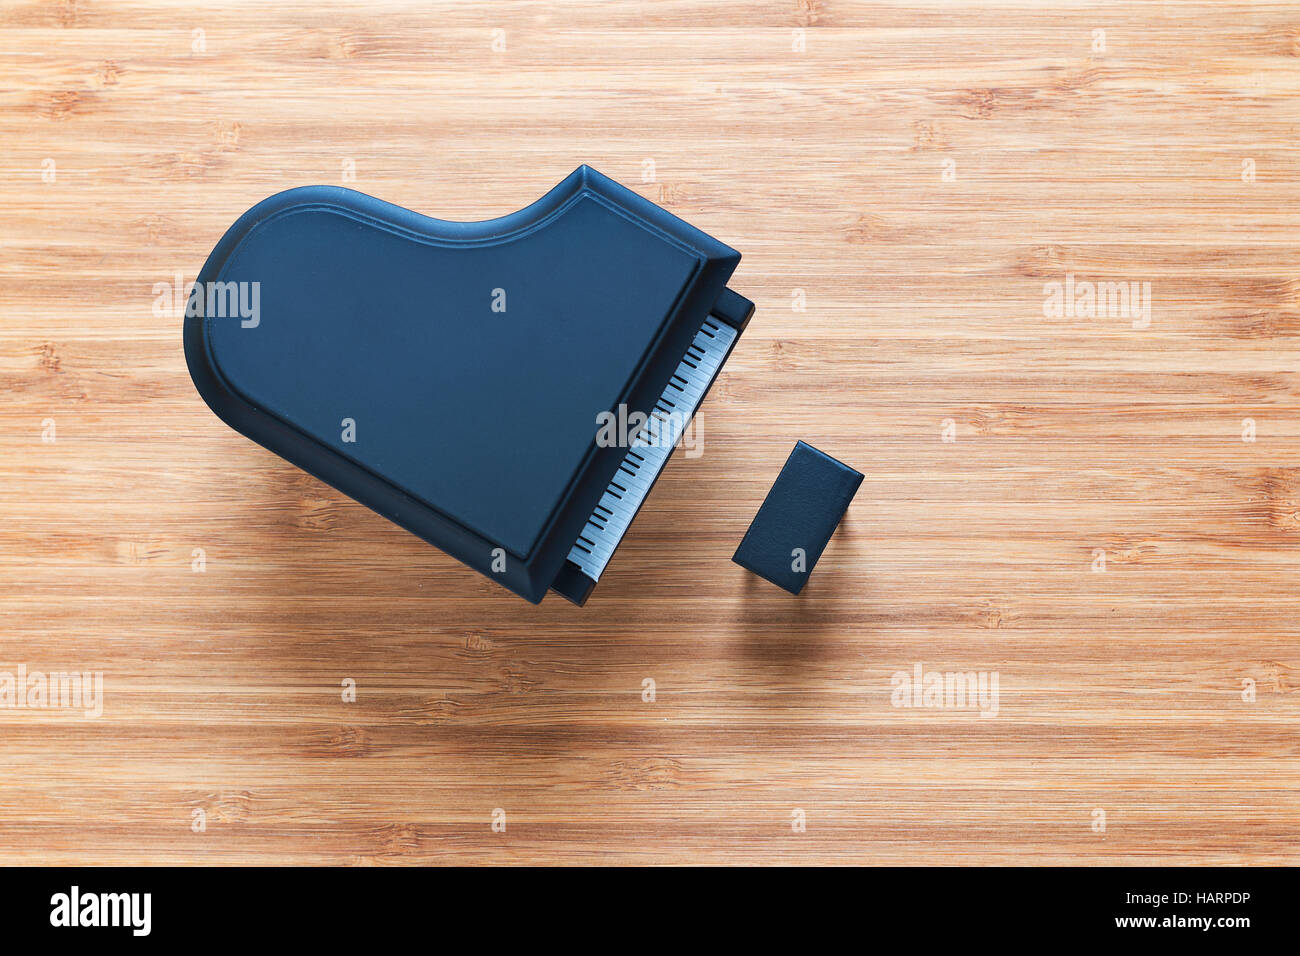 Black toy grand piano on a wooden floor with stool standing near it. Top view. Music concept. Stock Photo